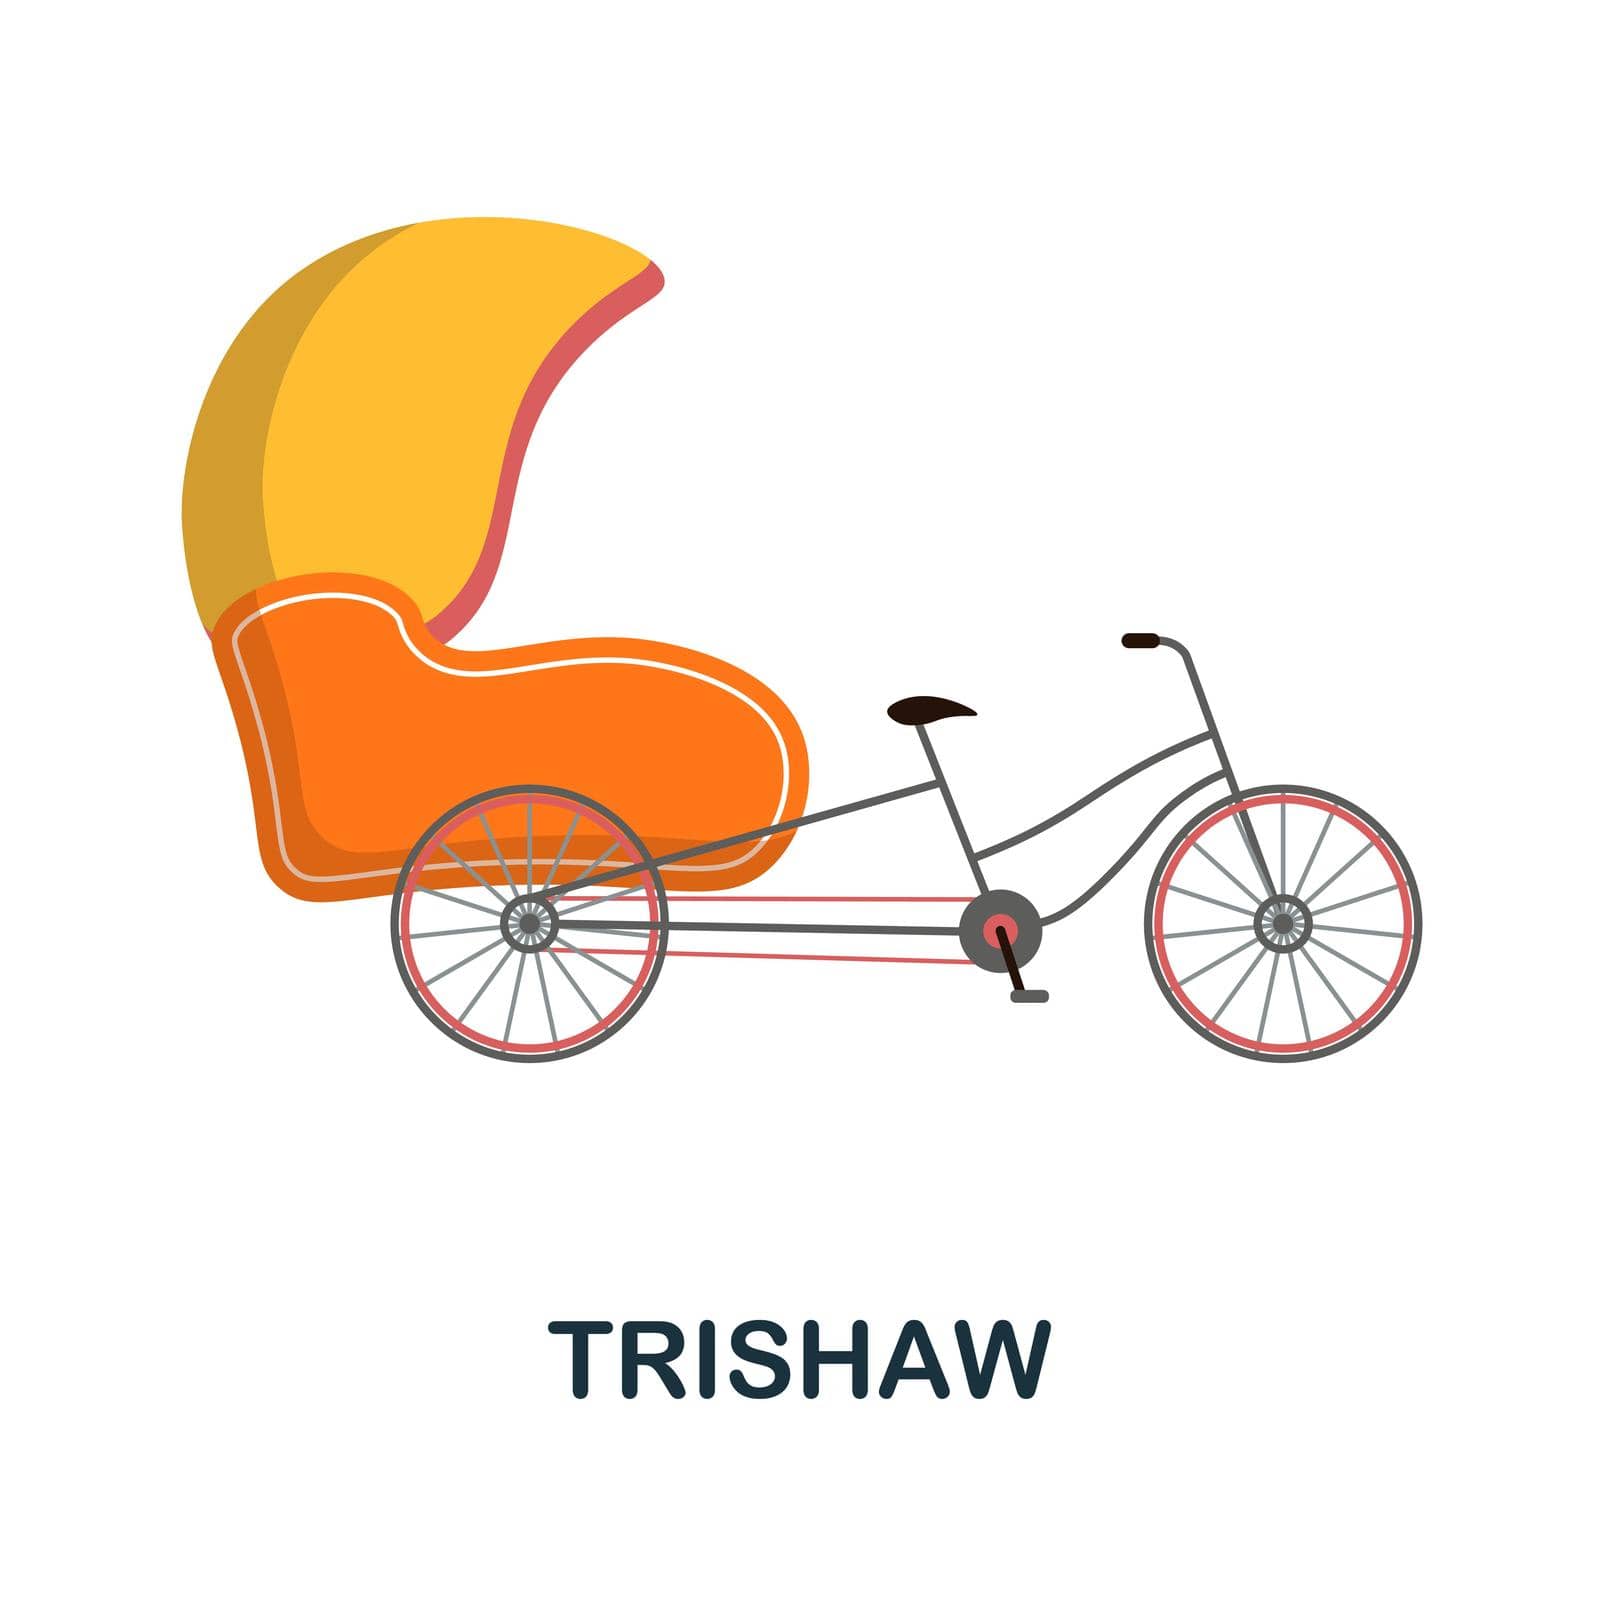 Trishaw flat icon. Simple colors elements from public transport collection. Flat Trishaw icon for graphics, wed design and more.